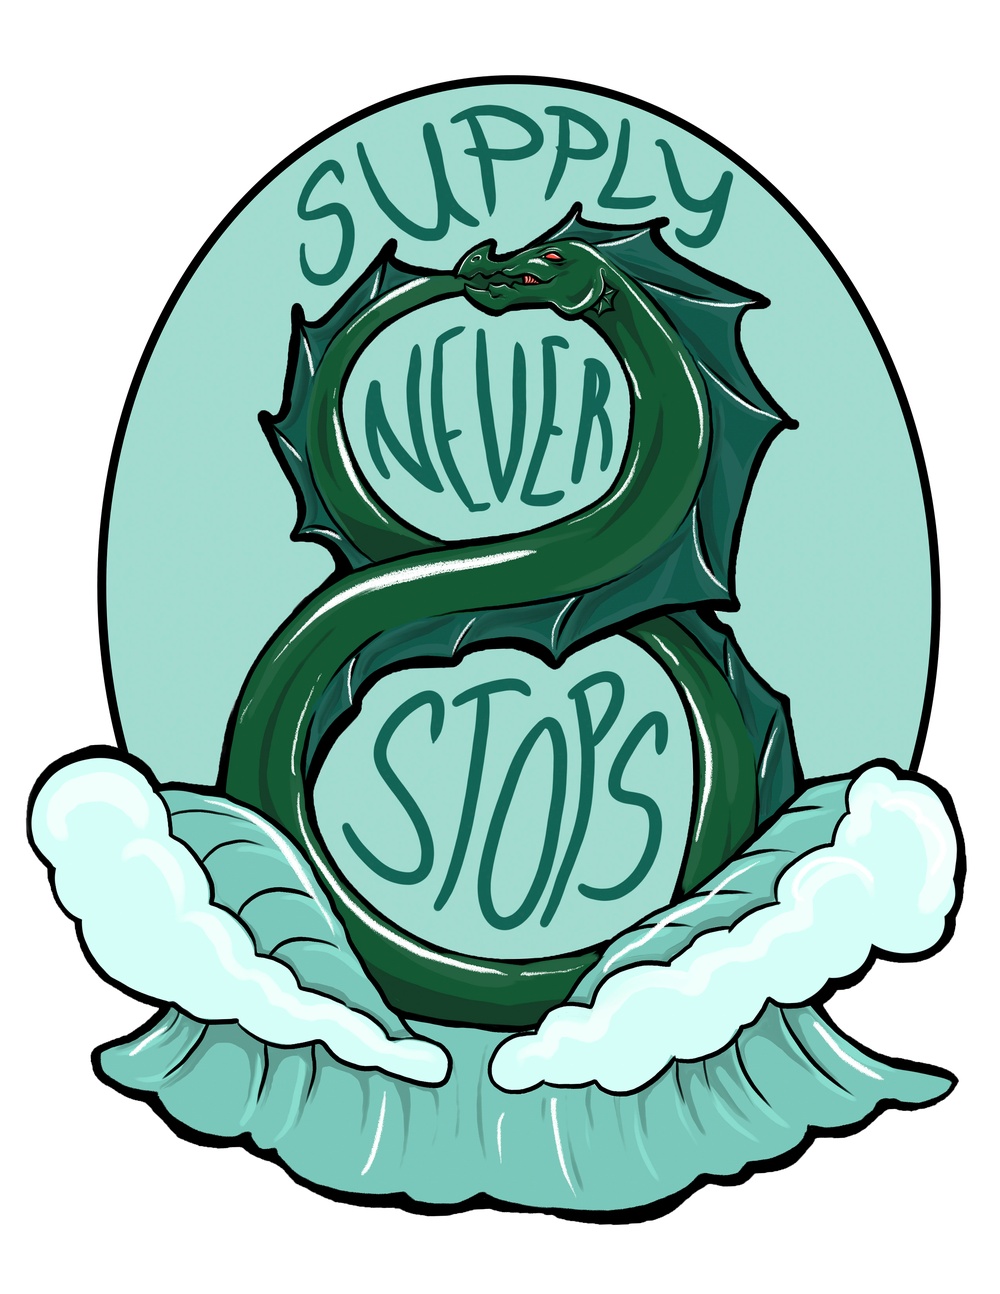 S-8 Divisional Patch